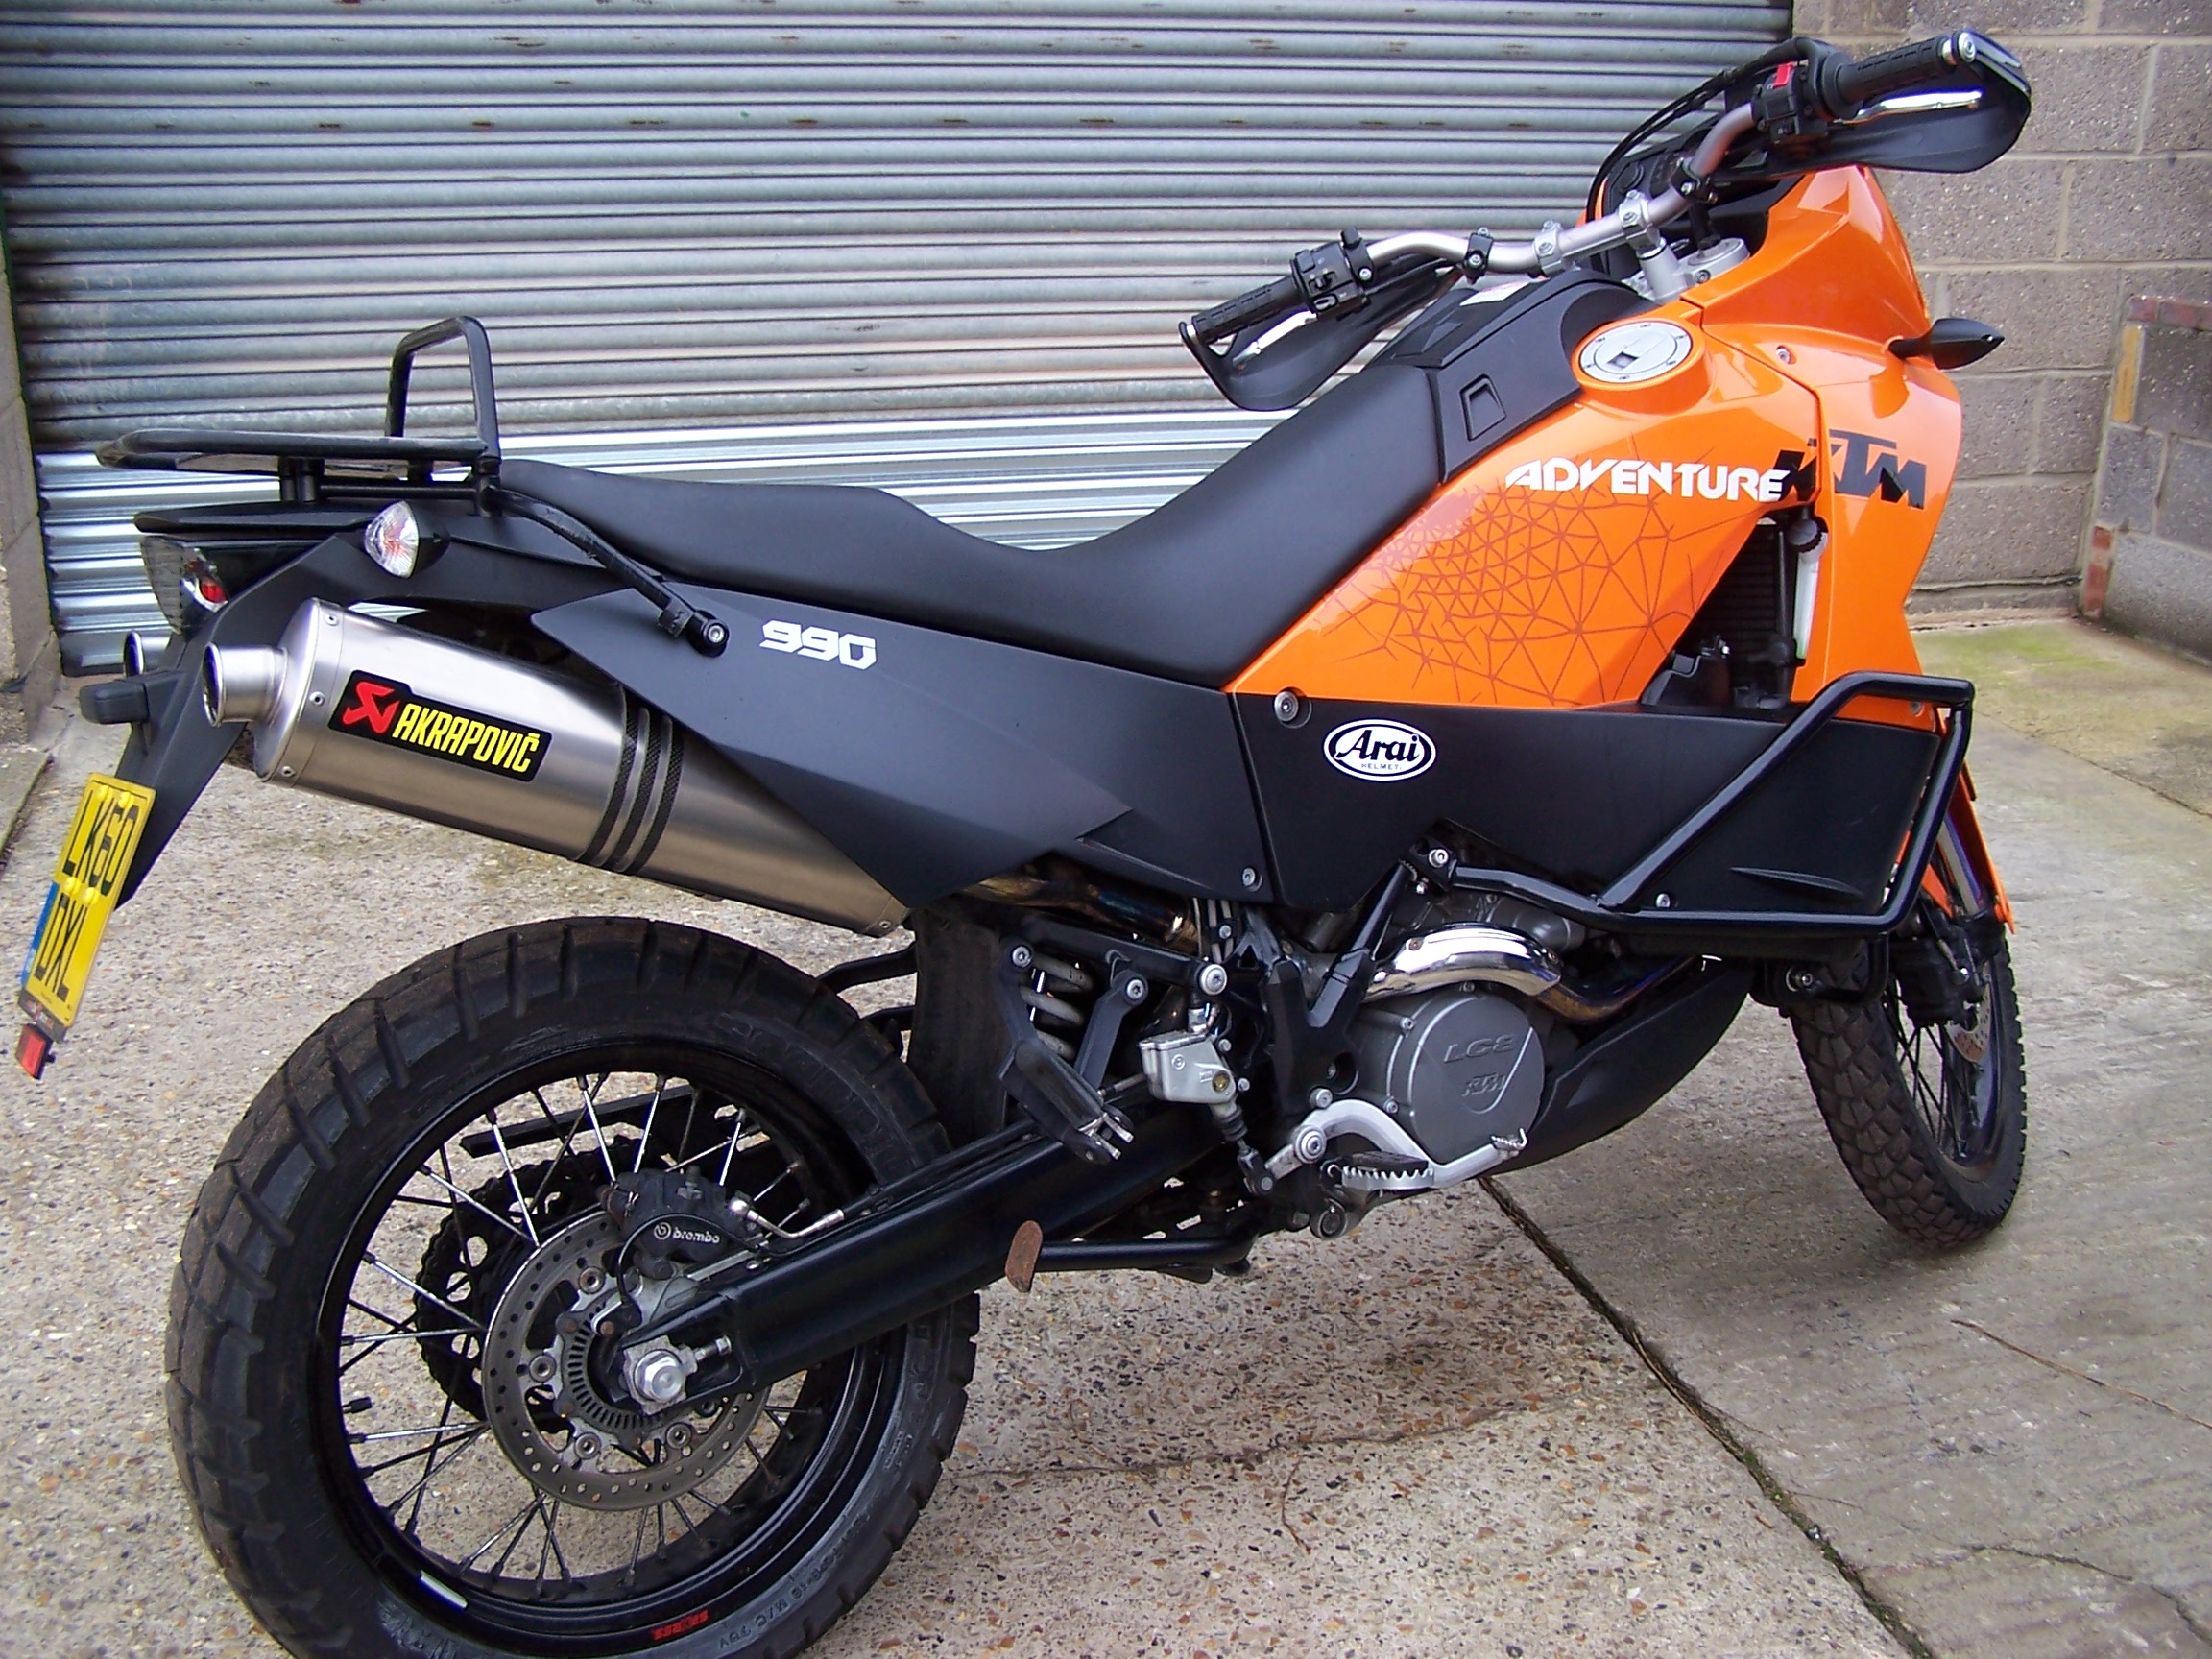 KTM 990 Adventure ECU remap – an owner emails his thoughts: “smoother low down and more like my old 950 carb model!”